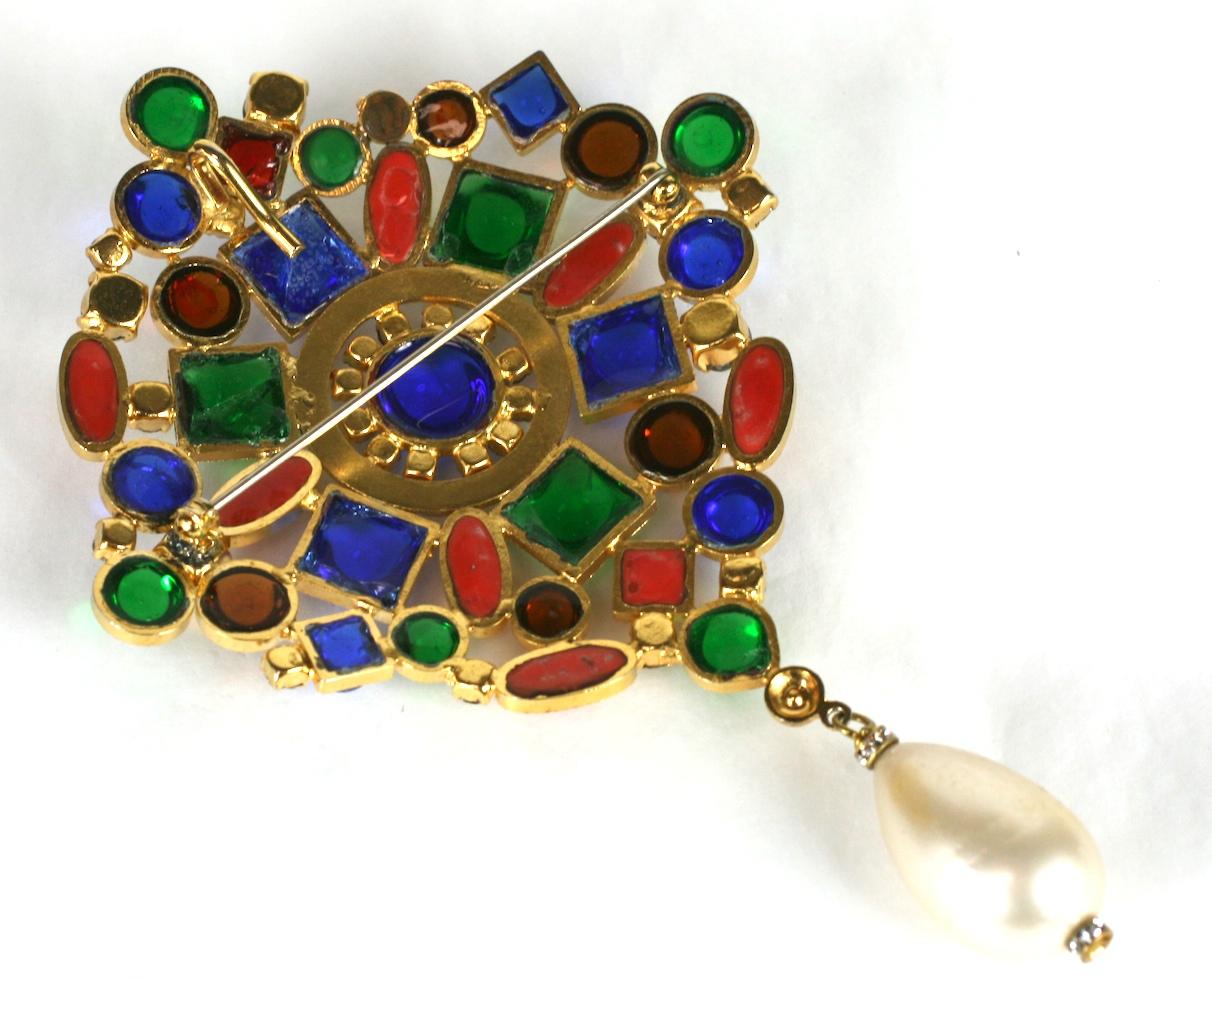  Maison Gripoix  for Chanel Large Multi Colored  Crest Brooch, France  In Excellent Condition For Sale In New York, NY